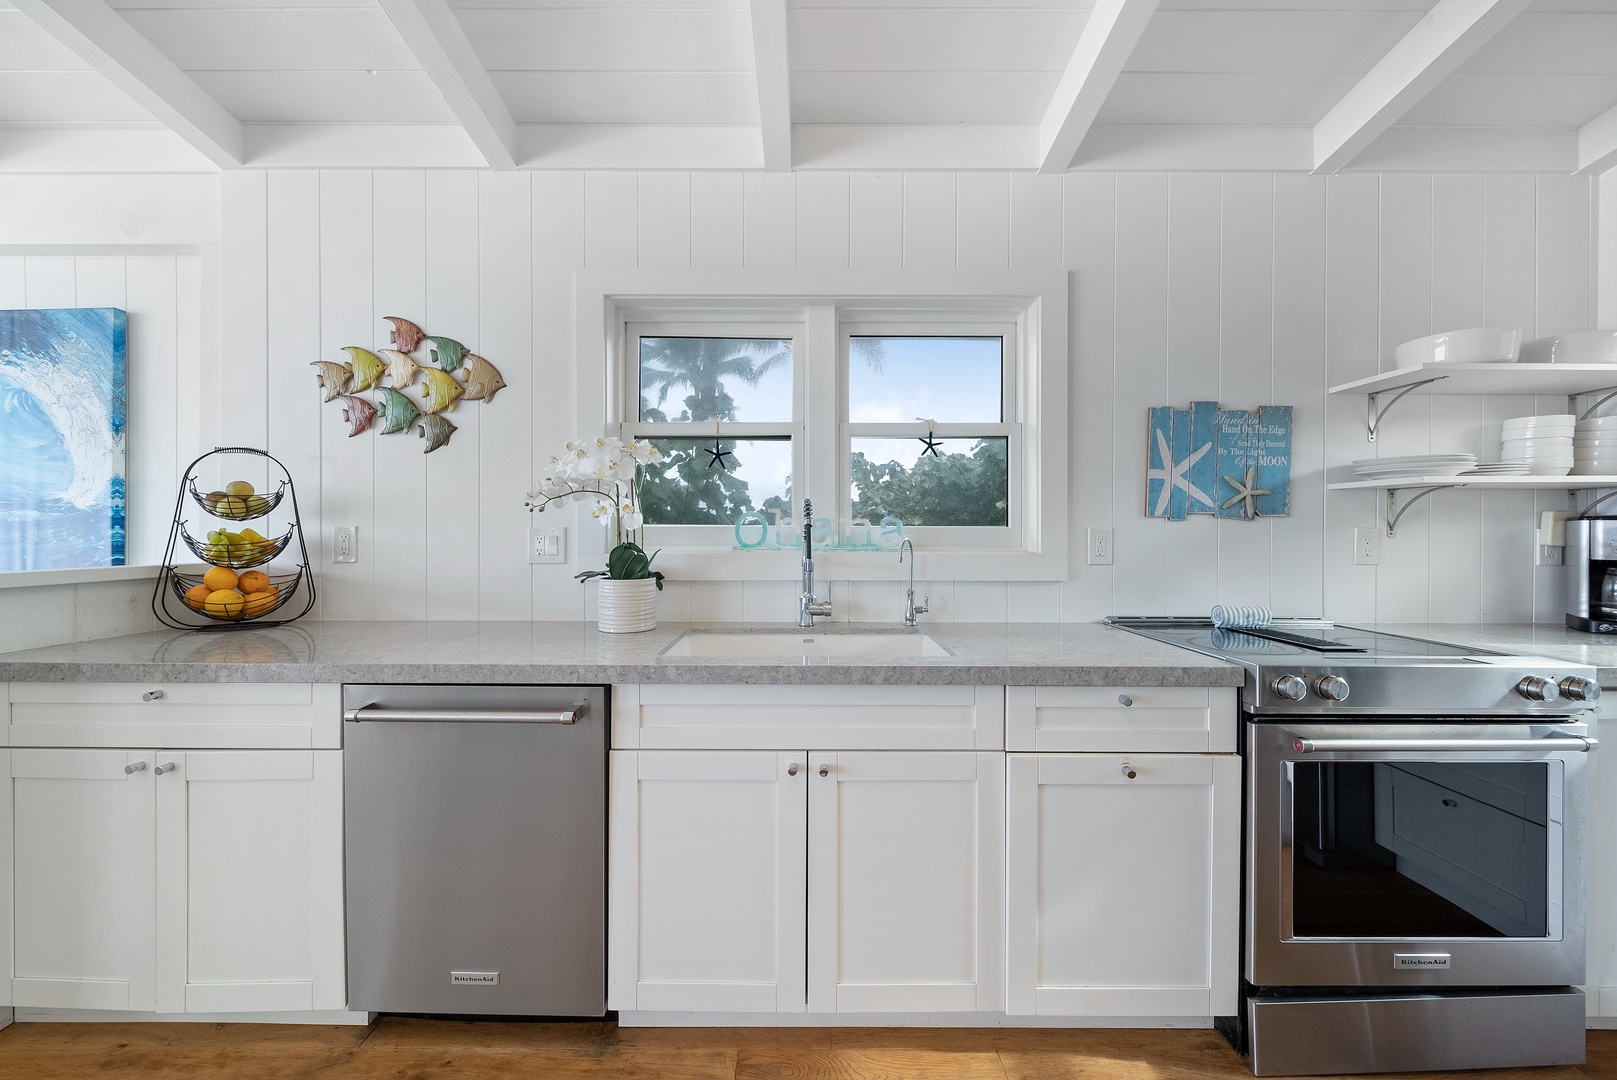 Haleiwa Vacation Rentals, Surfer's Paradise - Lush, tropical views from the kitchen sink